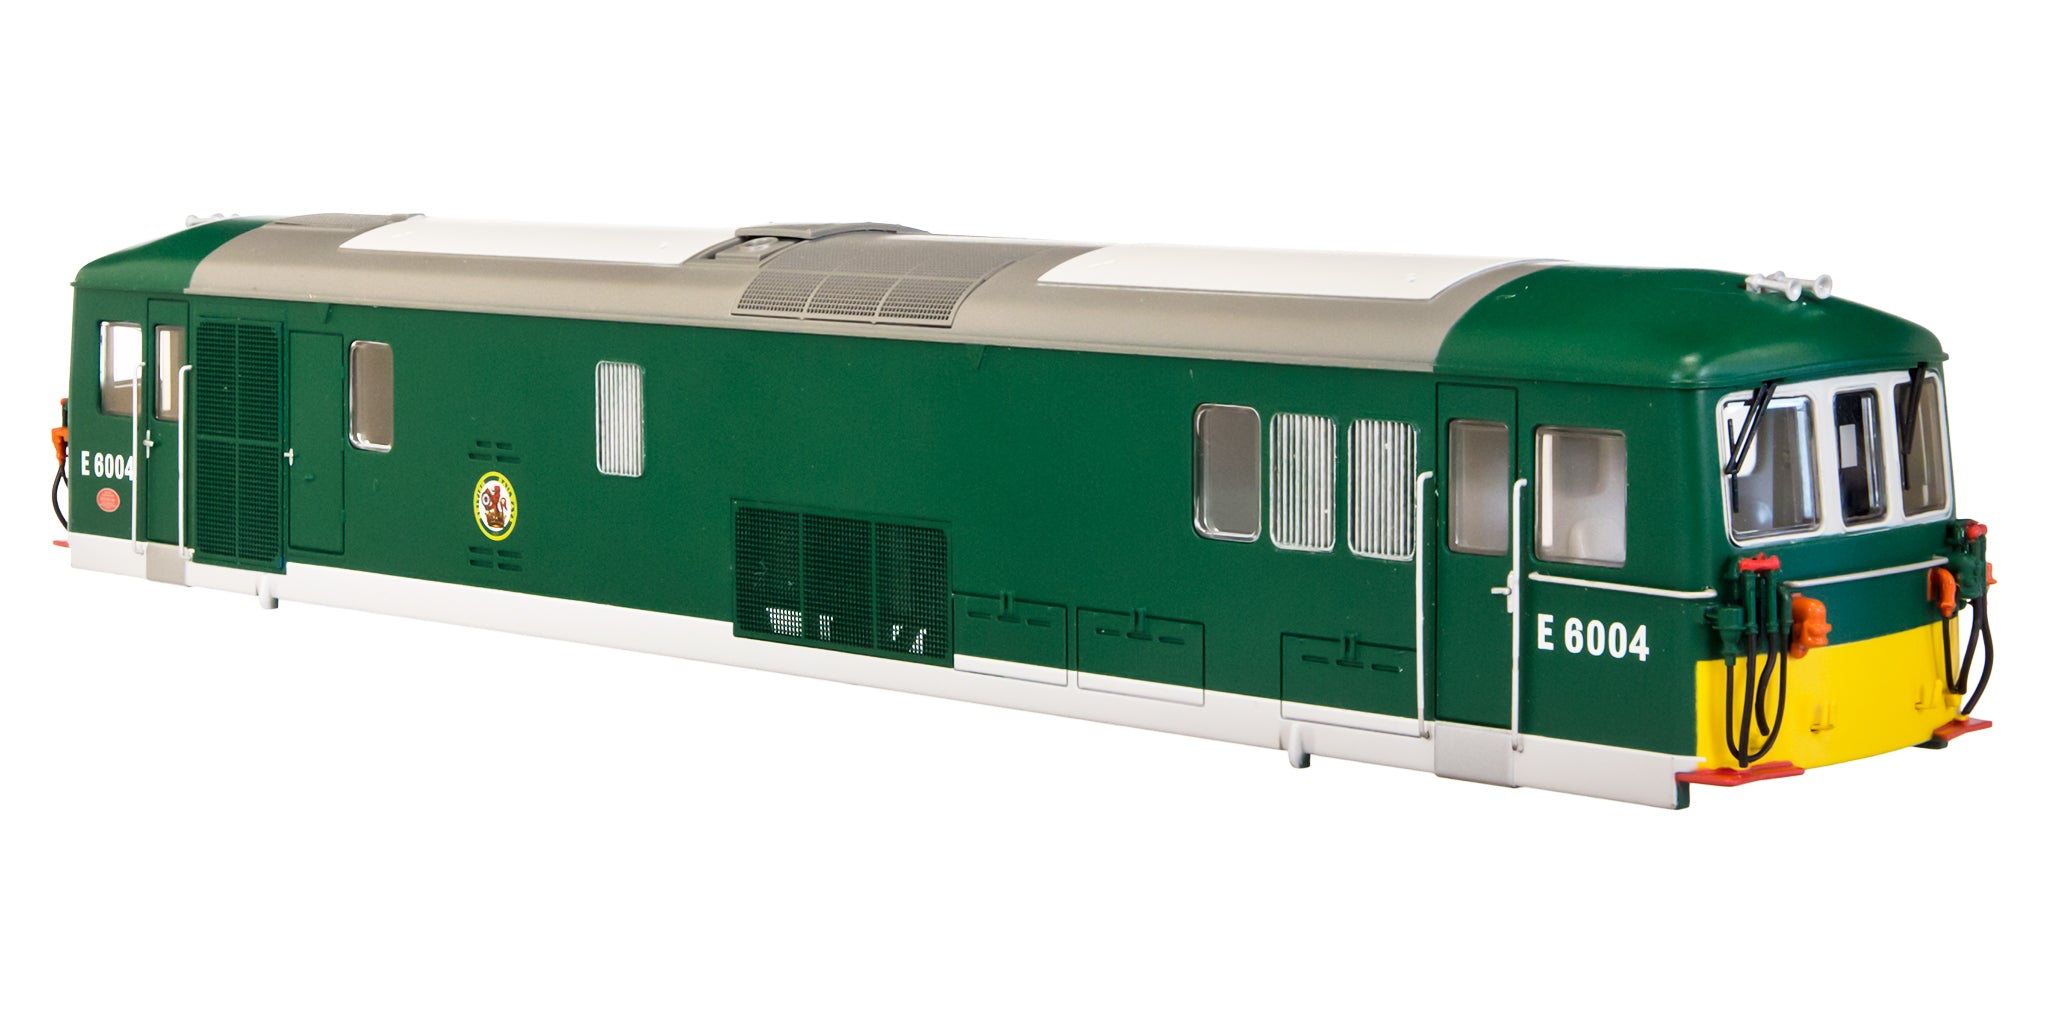 4D-006-BSREJECT6004 Class 73 Body Shell BR Green 6004 Reject